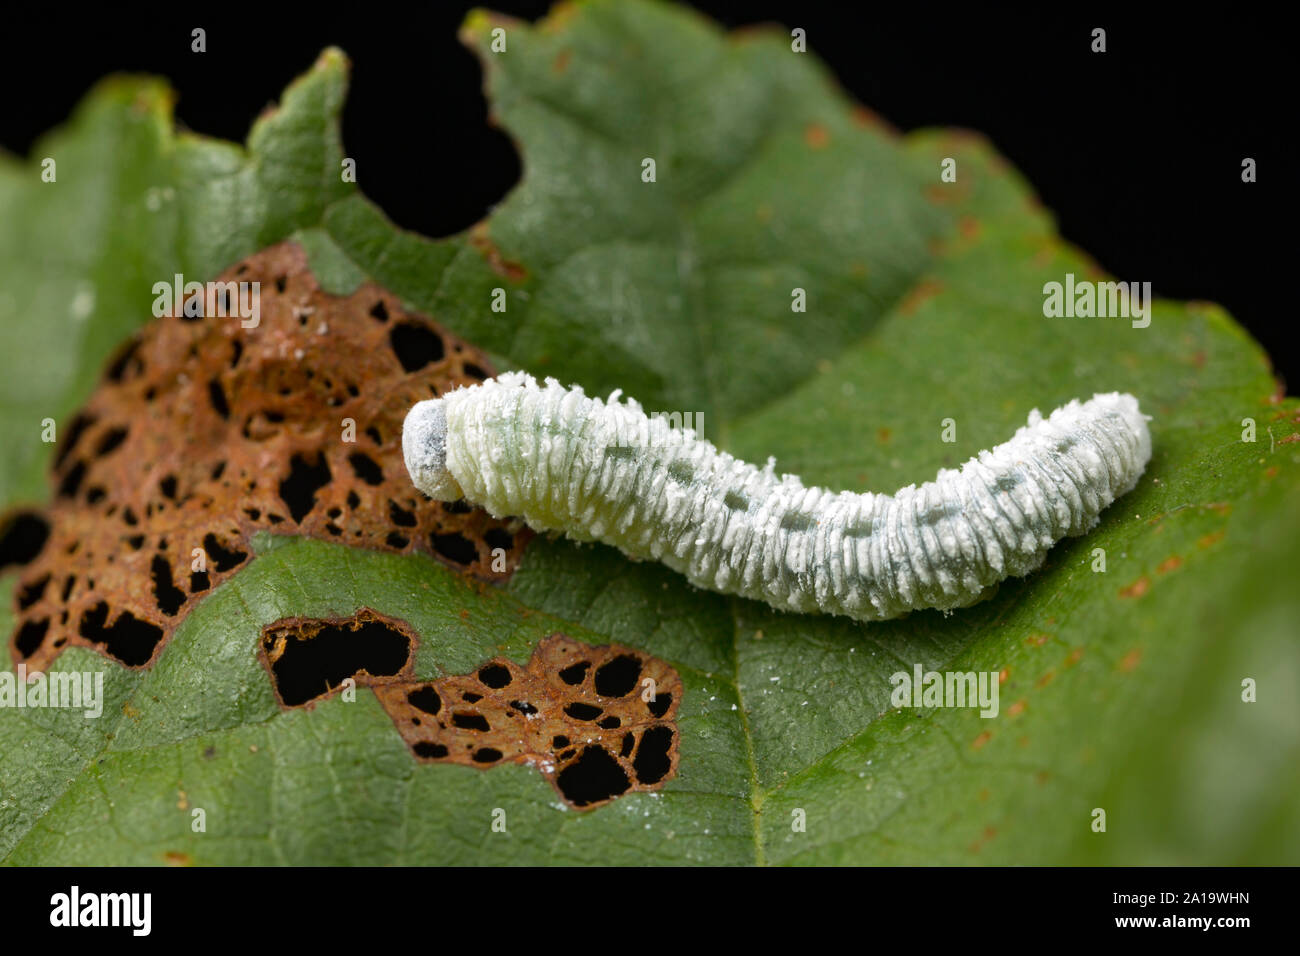 An example of the Alder sawfly larva, Eriocampa ovata, on an alder tree leaf. North Dorset England UK GB Stock Photo